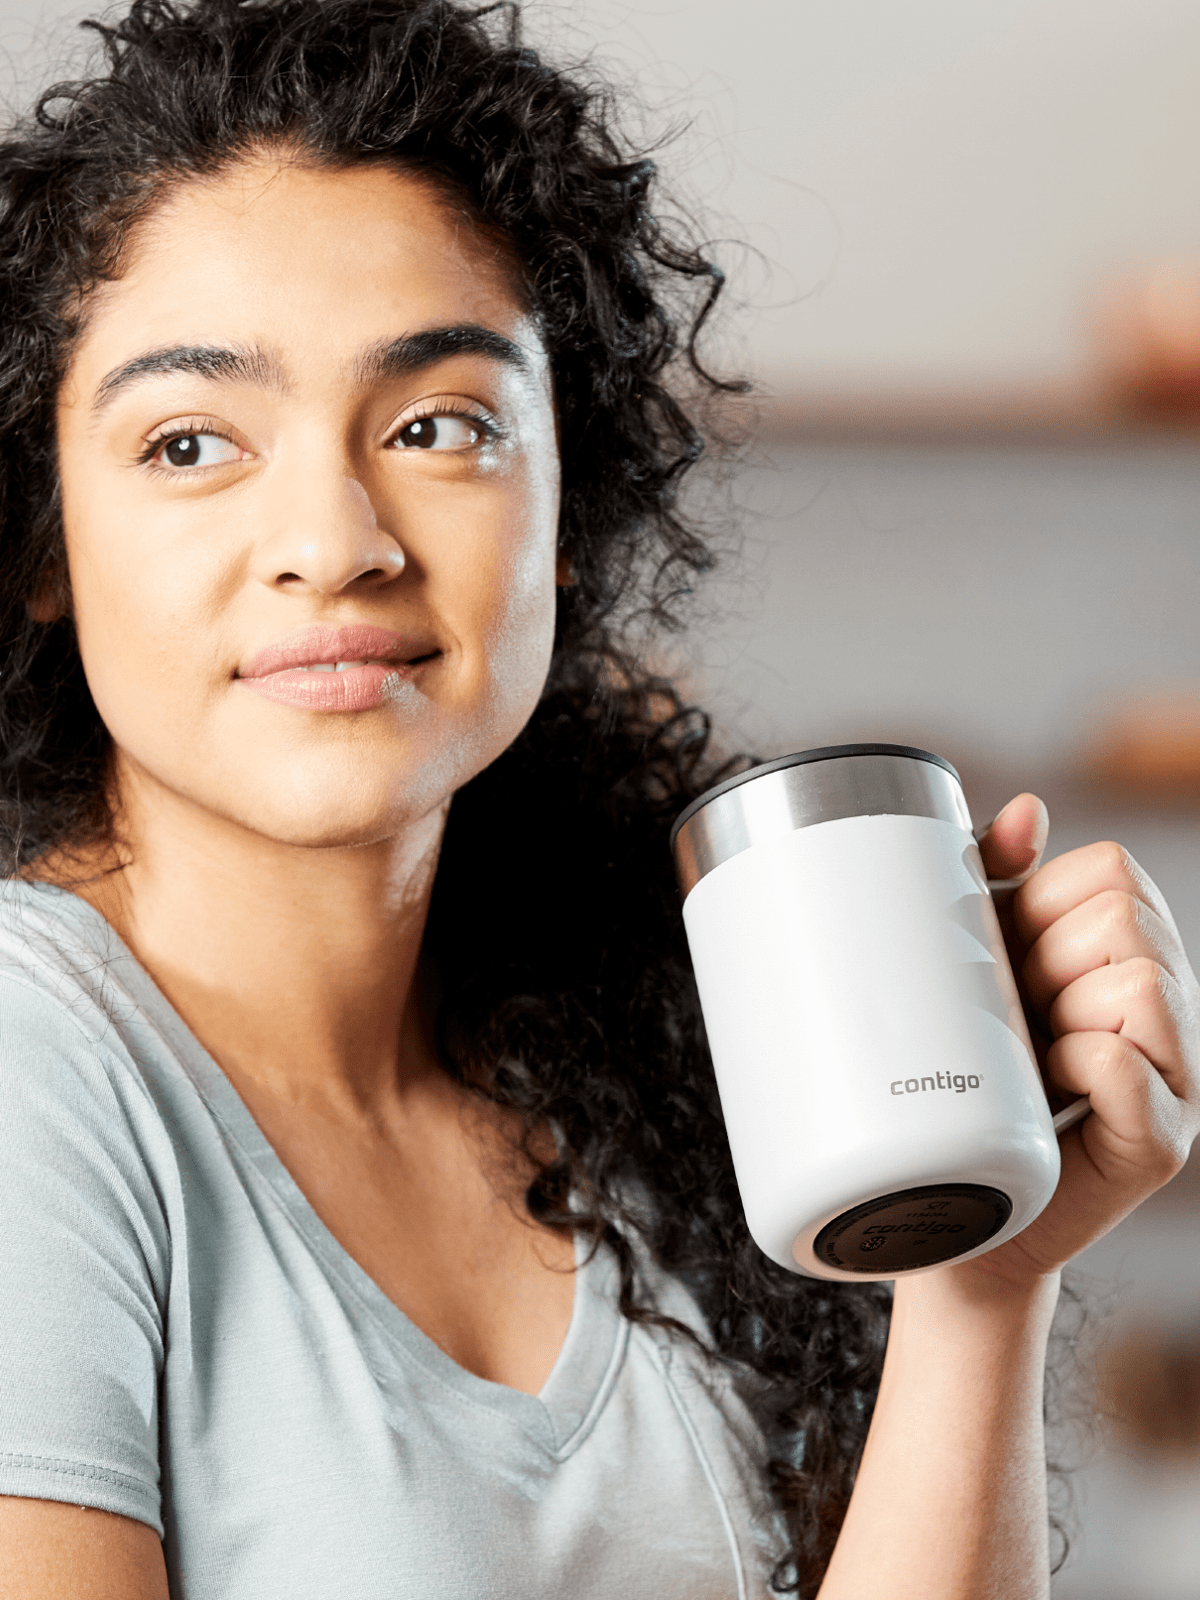 Thermal mug with ear Contigo Streeterville 420 ml - Grey Grey, BRANDS \  CONTIGO \ THERMAL MUGS BRANDS \ NEW COMPANY GIFTS \ OFFICE GADGETS \  THERMAL MUGS